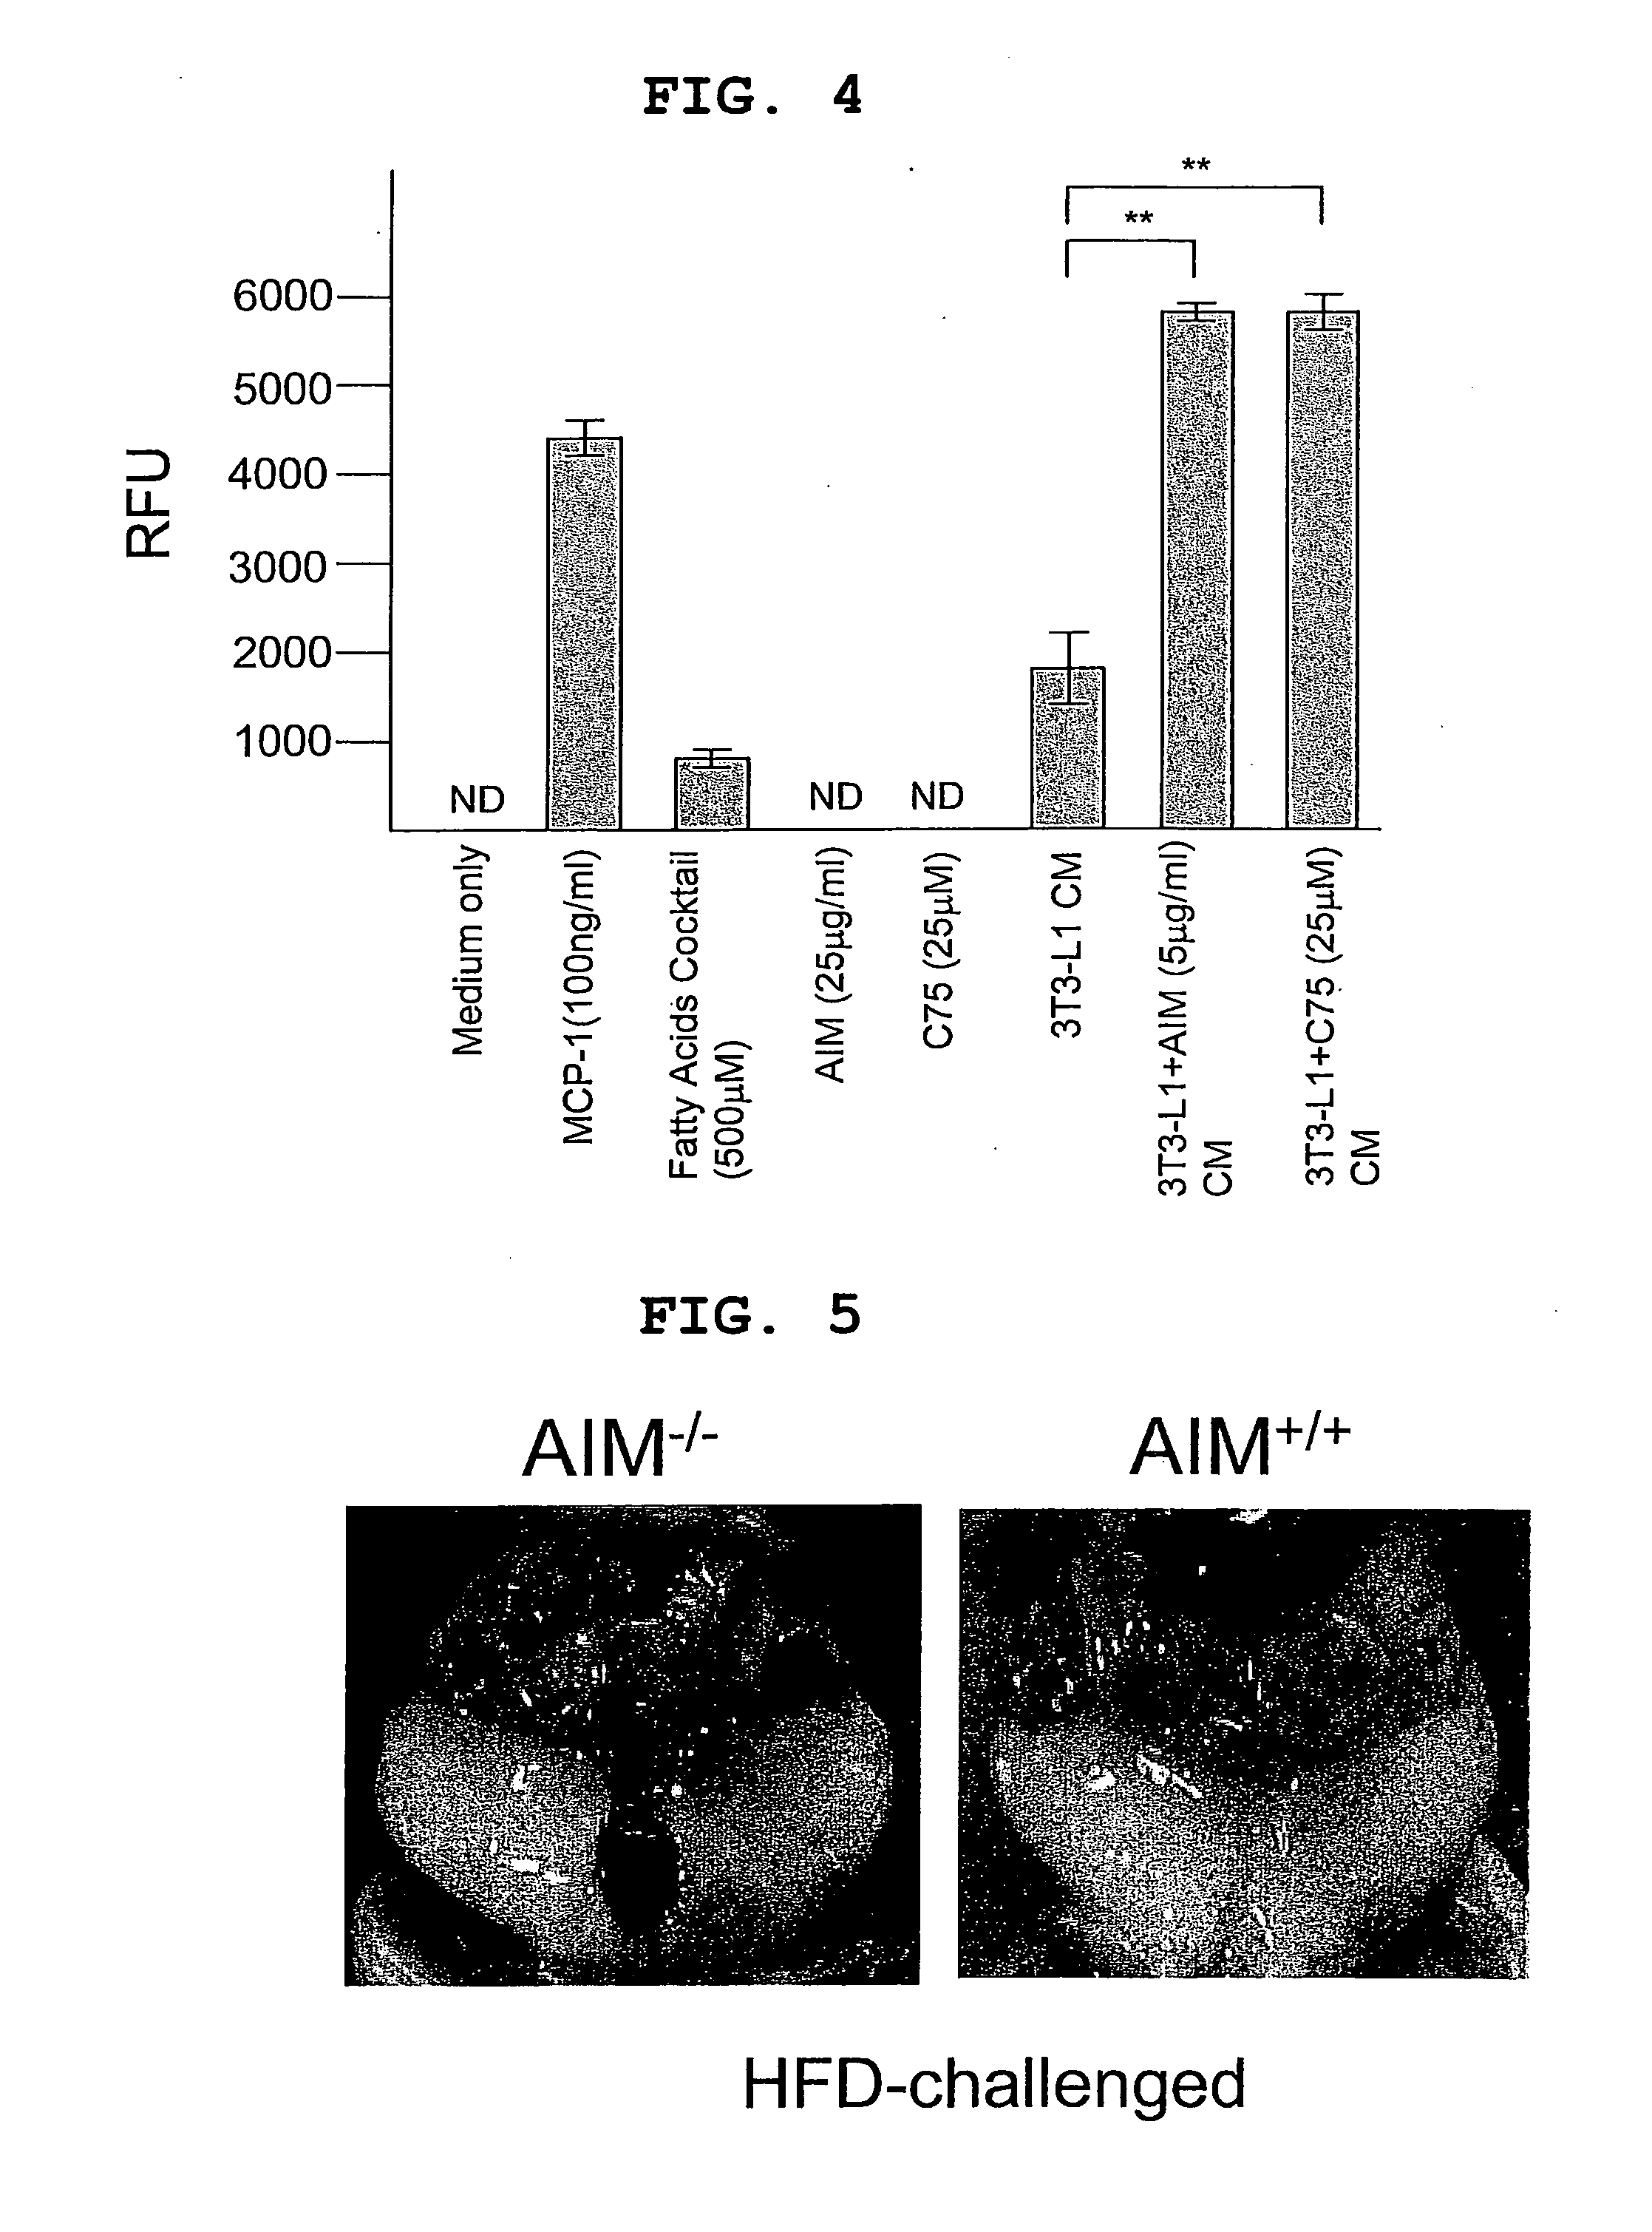 Method for prevention or treatment of metabolic syndrome